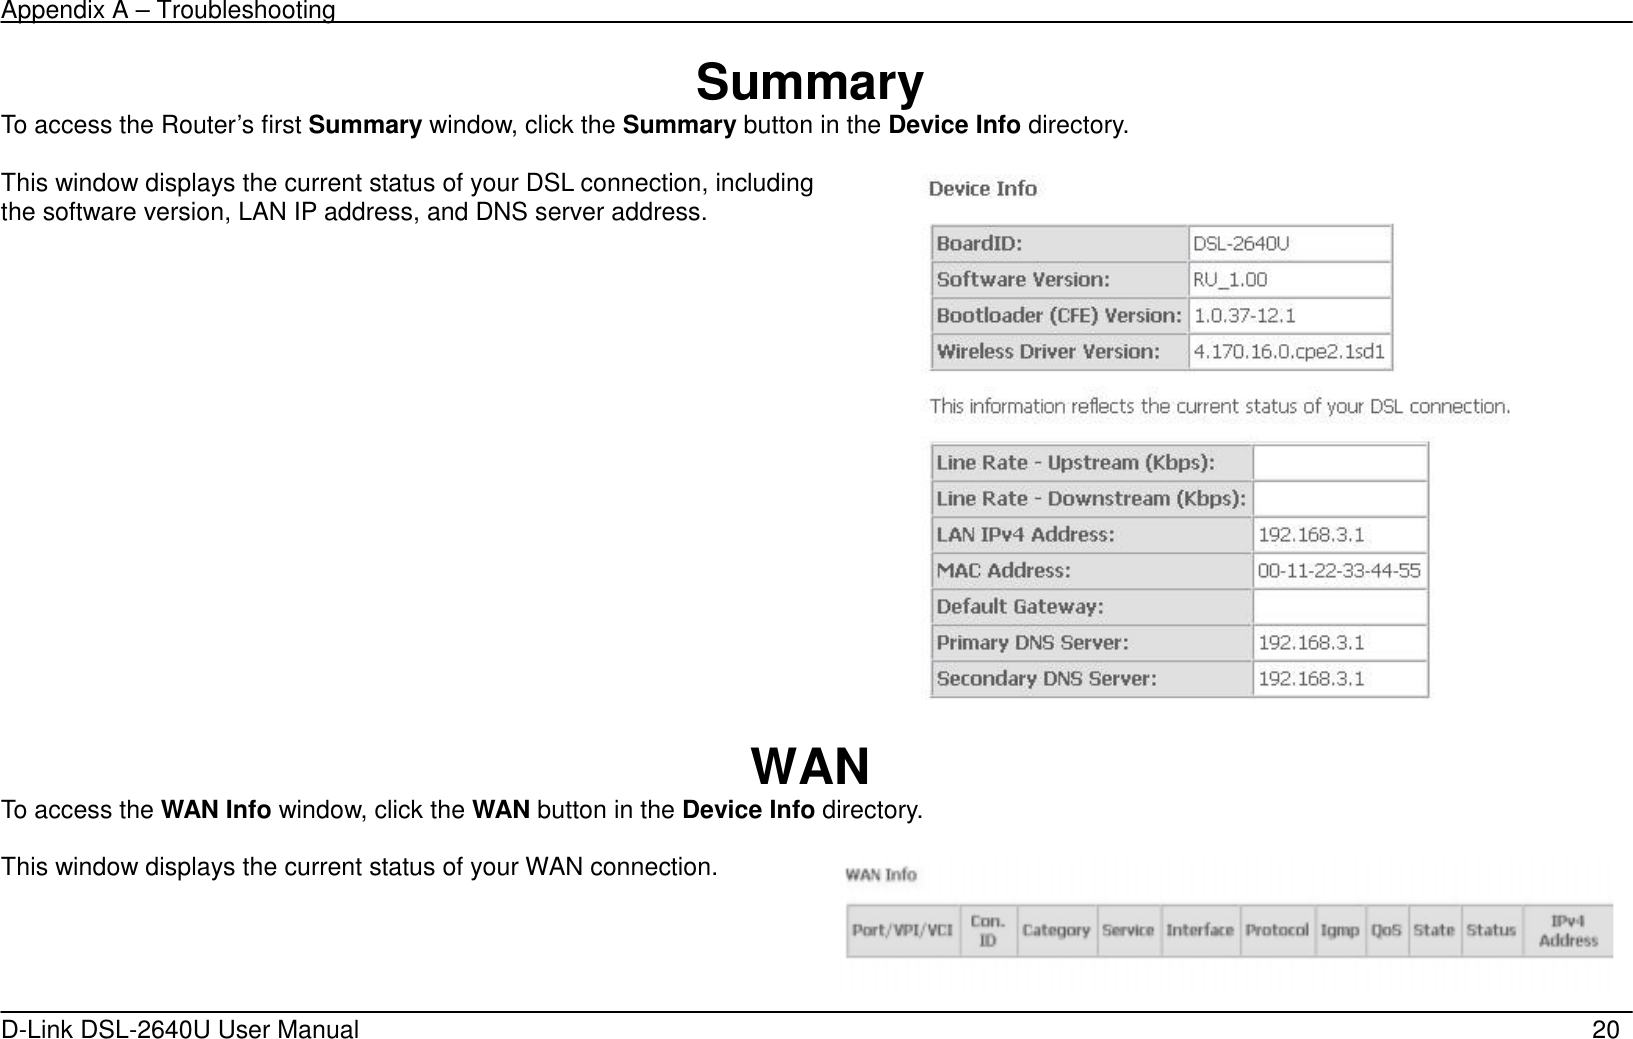 Appendix A – Troubleshooting   D-Link DSL-2640U User Manual    20 Summary To access the Router’s first Summary window, click the Summary button in the Device Info directory.  This window displays the current status of your DSL connection, including the software version, LAN IP address, and DNS server address.   WAN To access the WAN Info window, click the WAN button in the Device Info directory.  This window displays the current status of your WAN connection. 